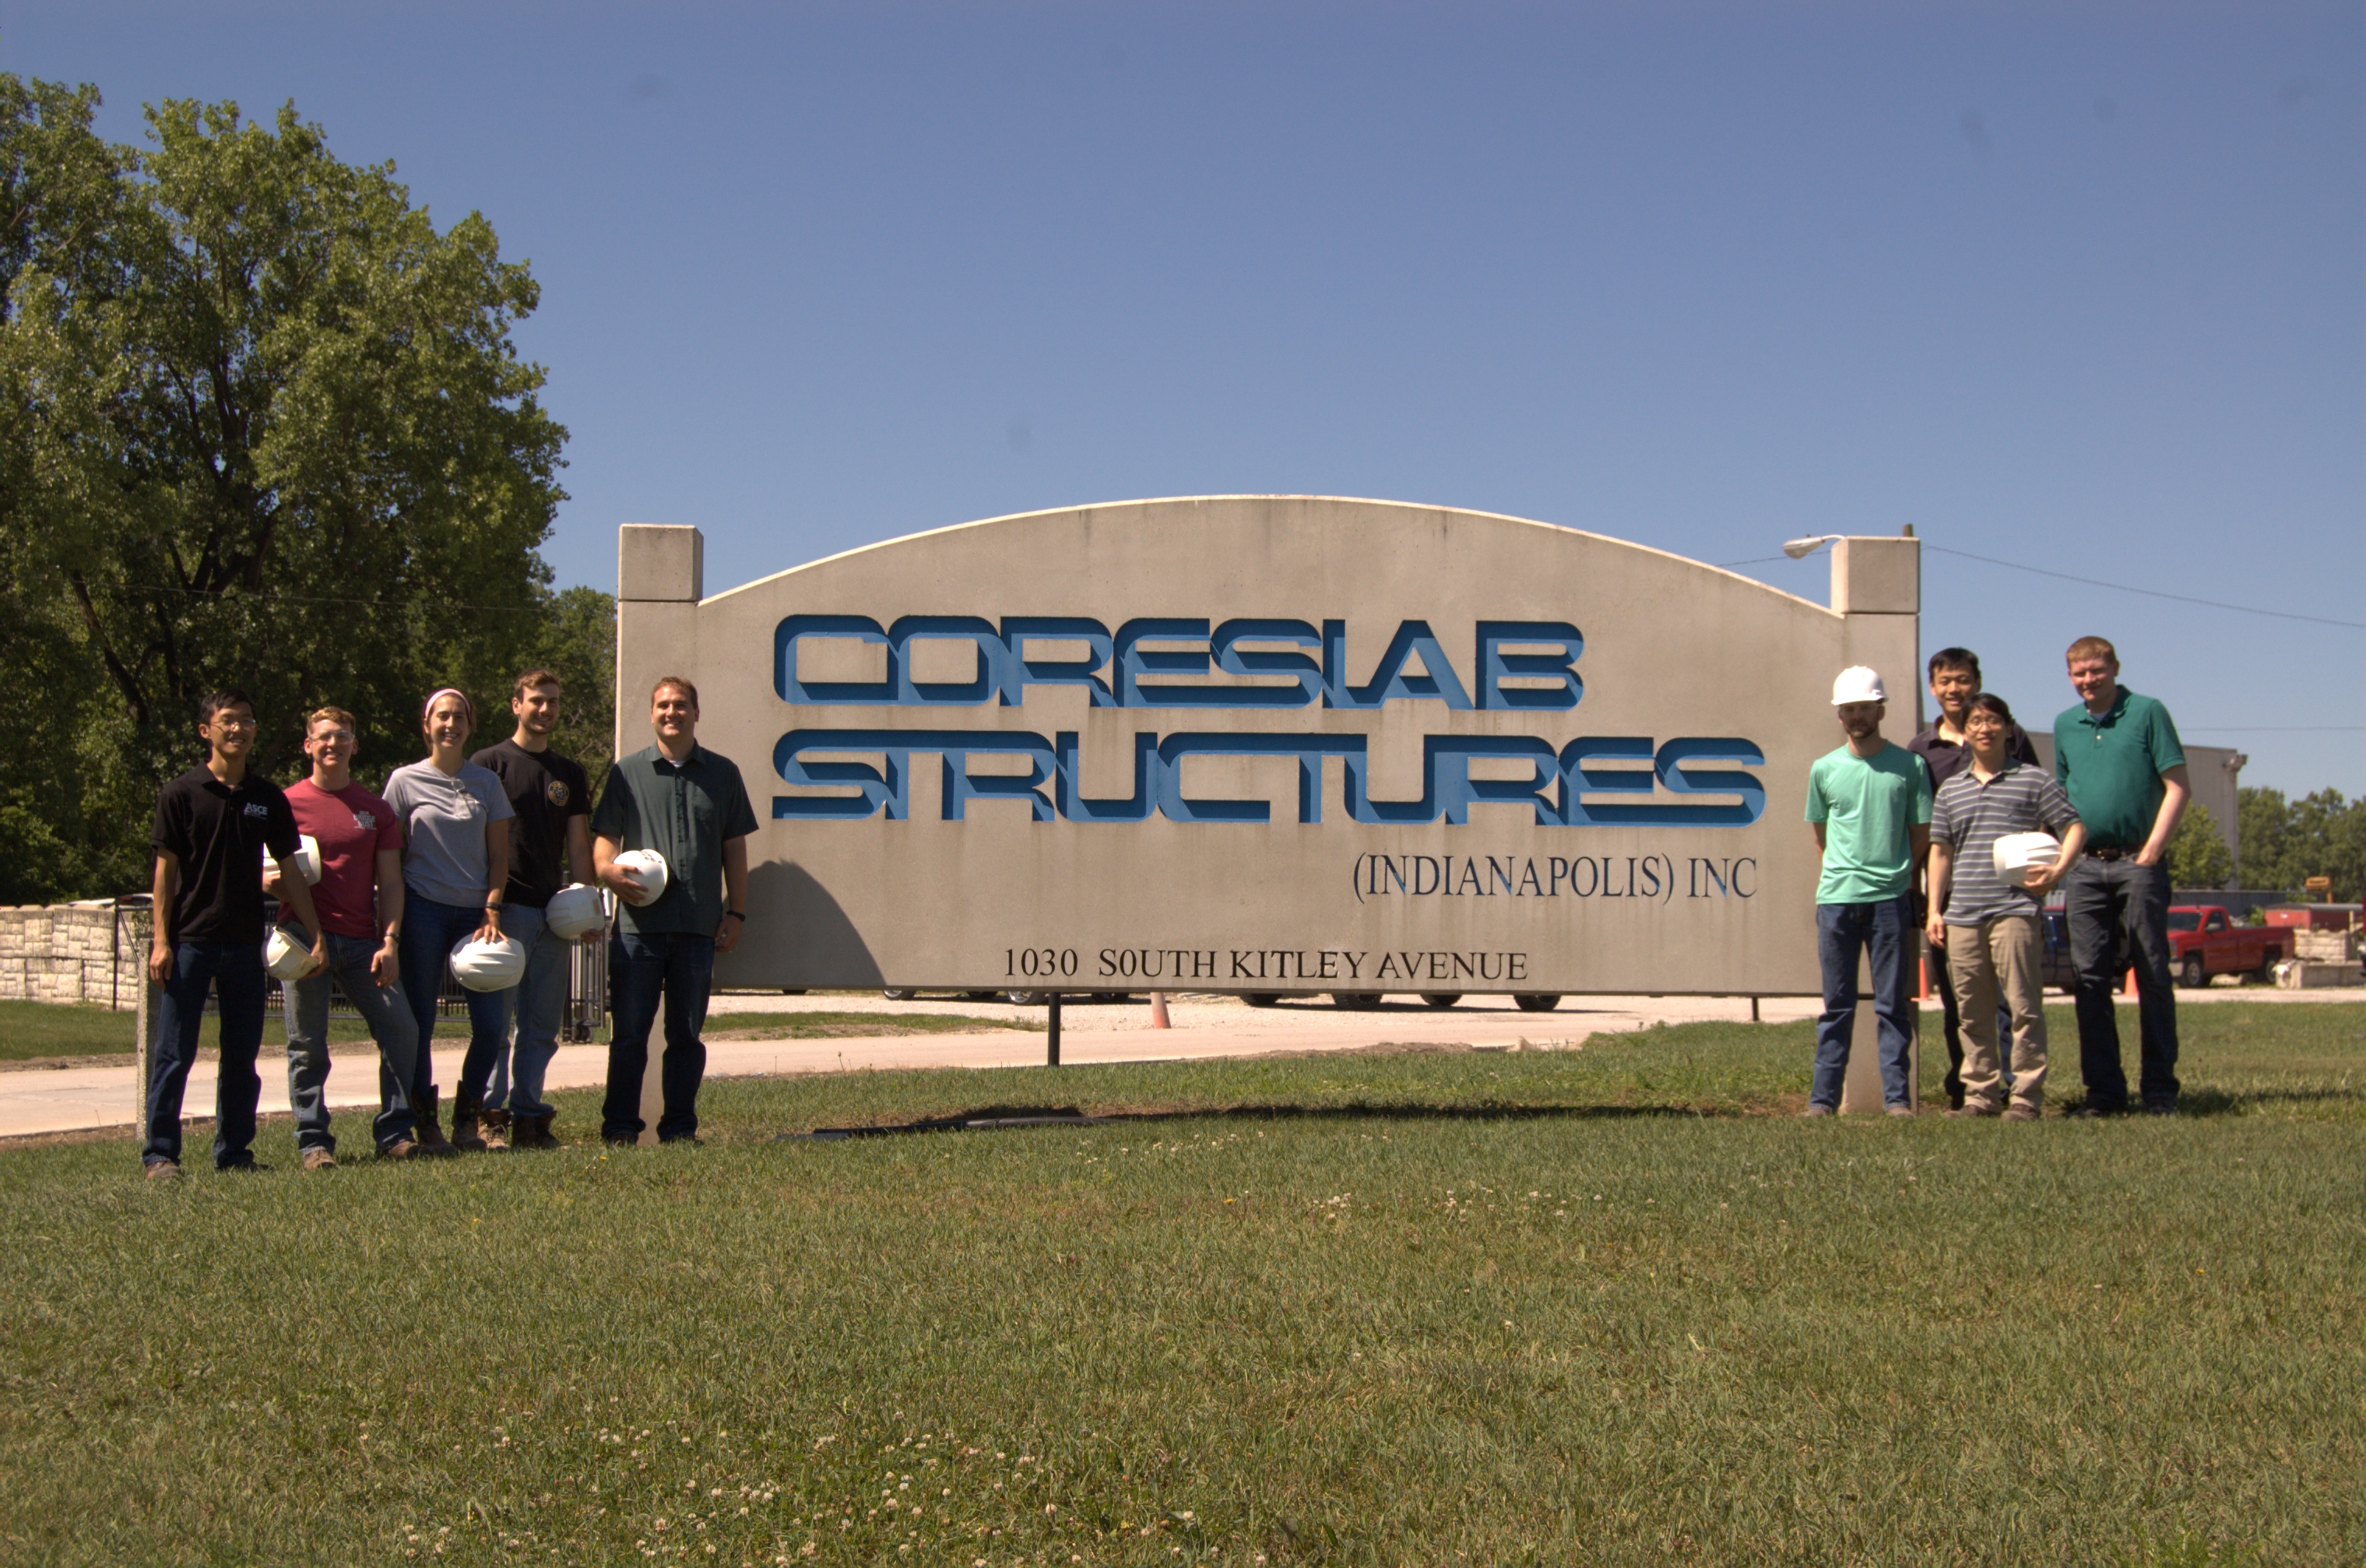 Group Photo in front of the Coreslab sign